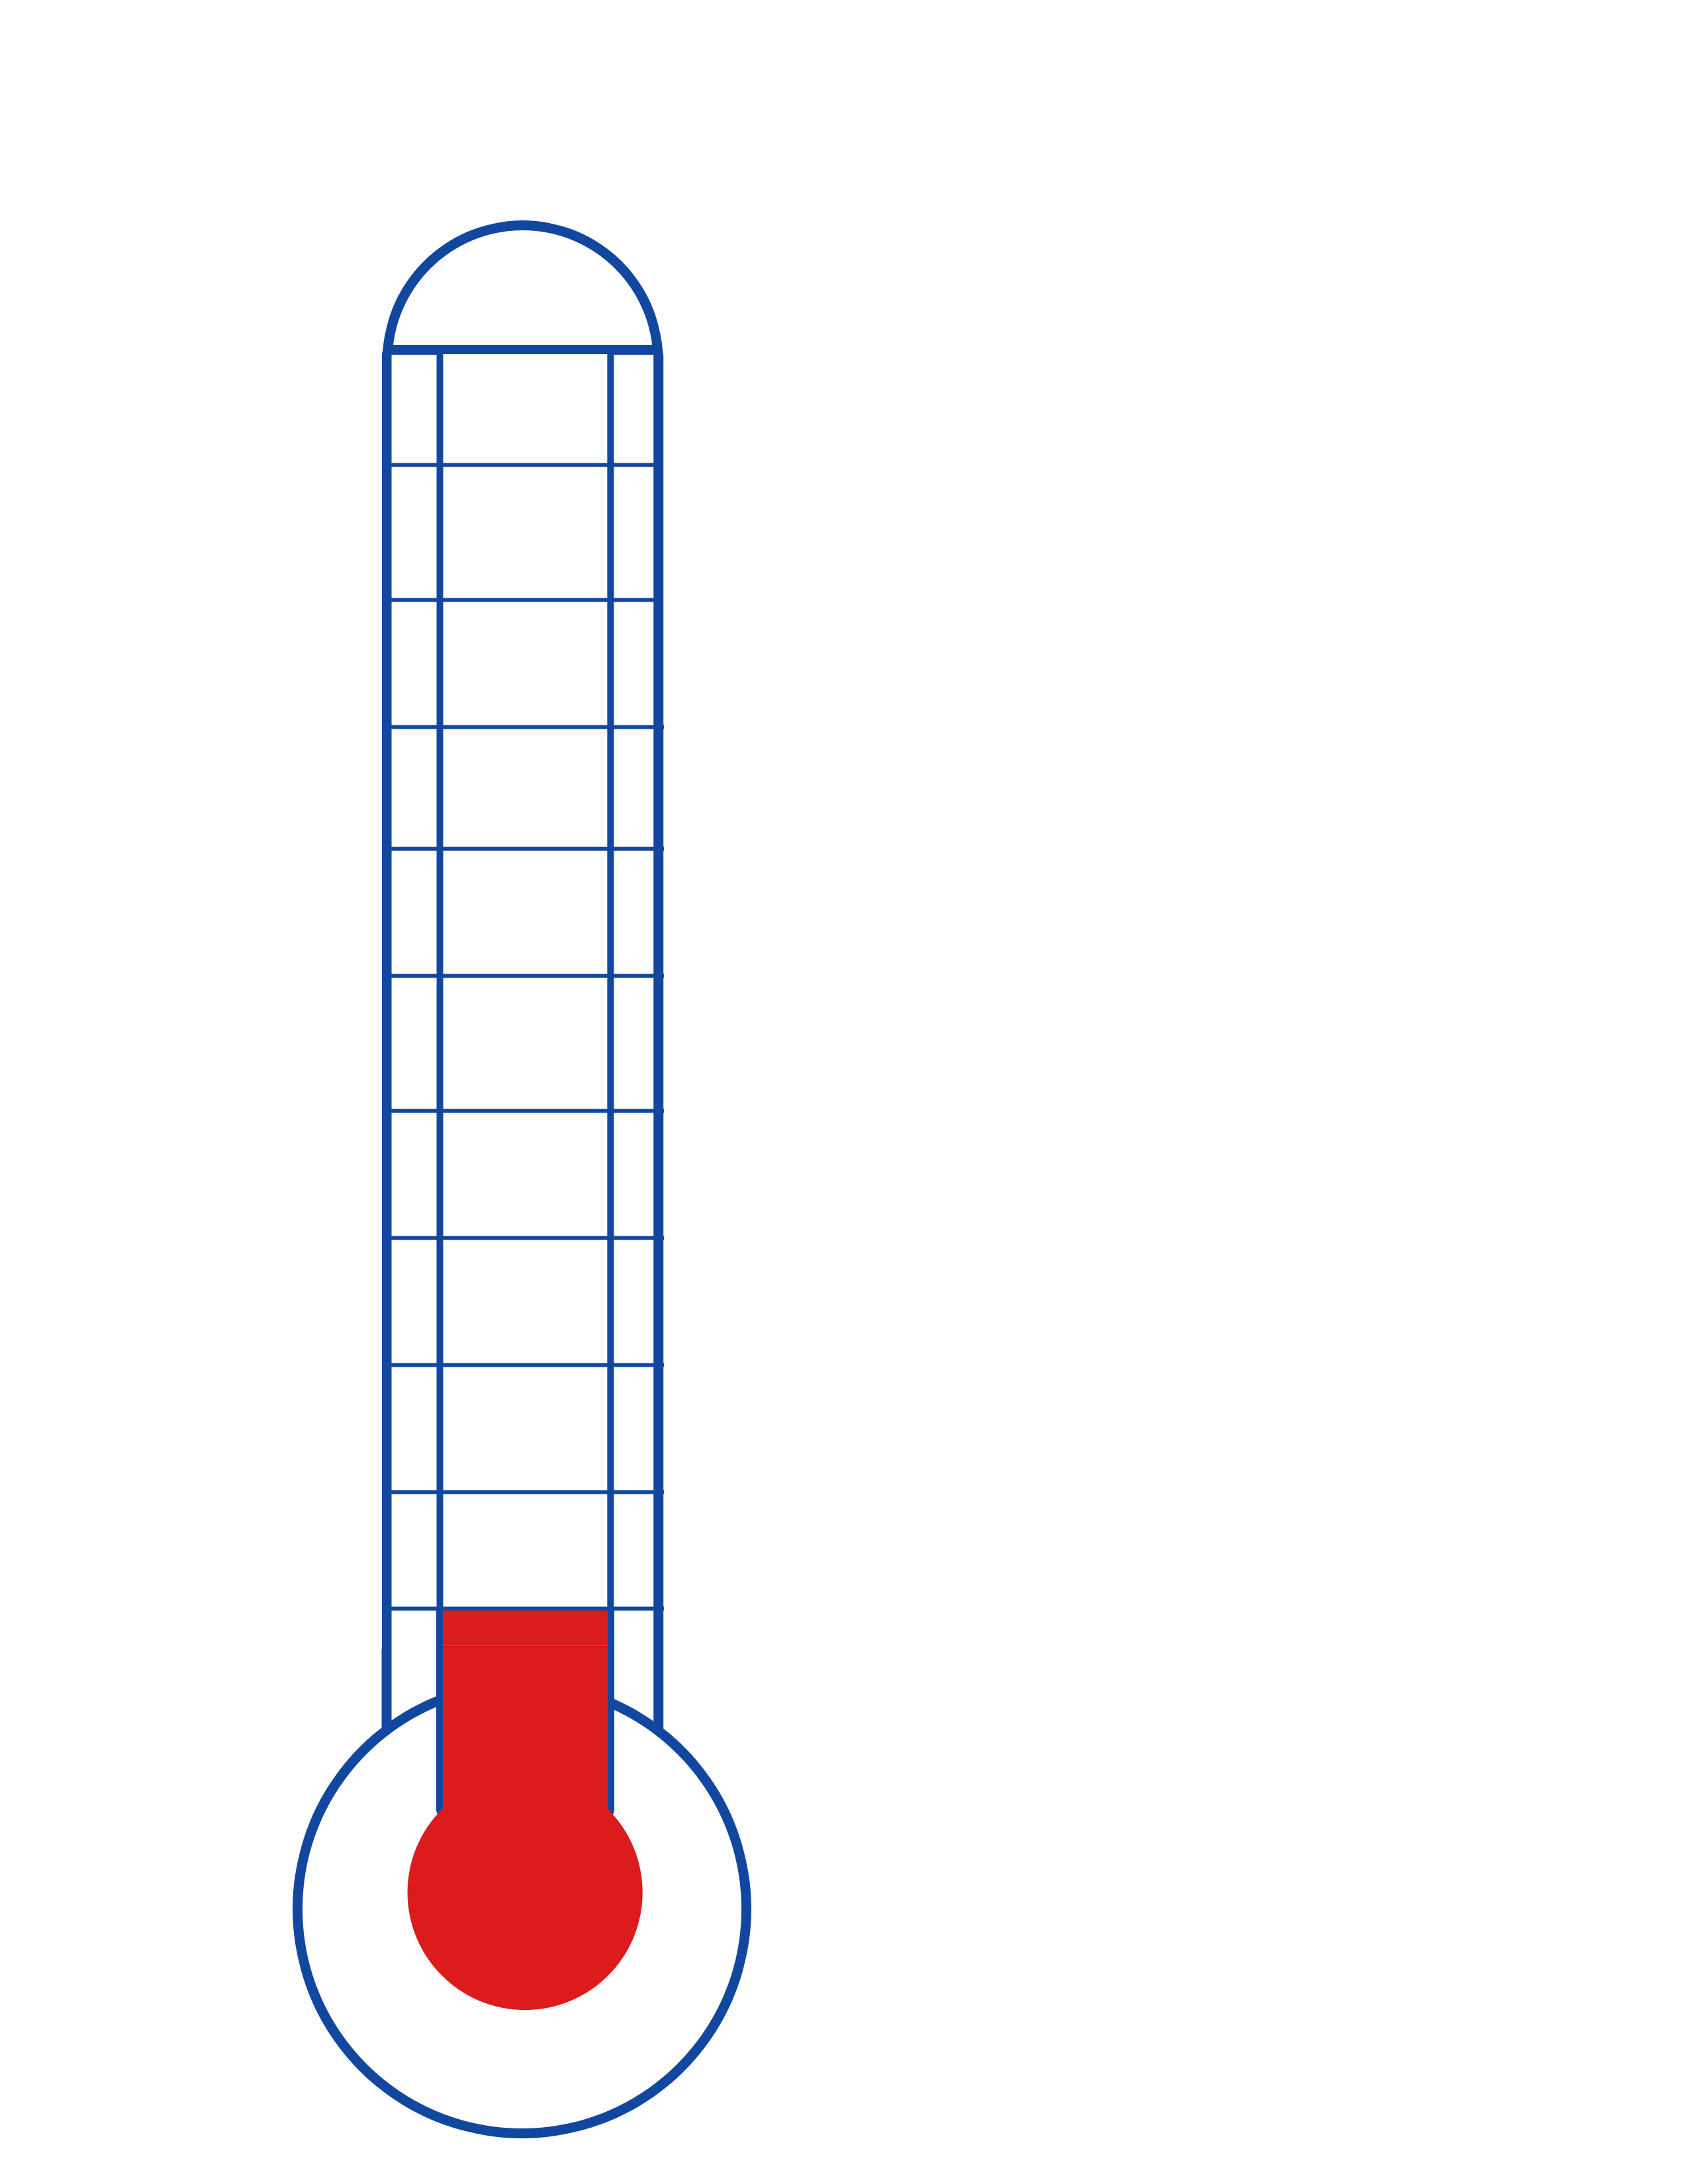 Fundraising Thermometer Template Blank Thermometer 2 Thermometer    